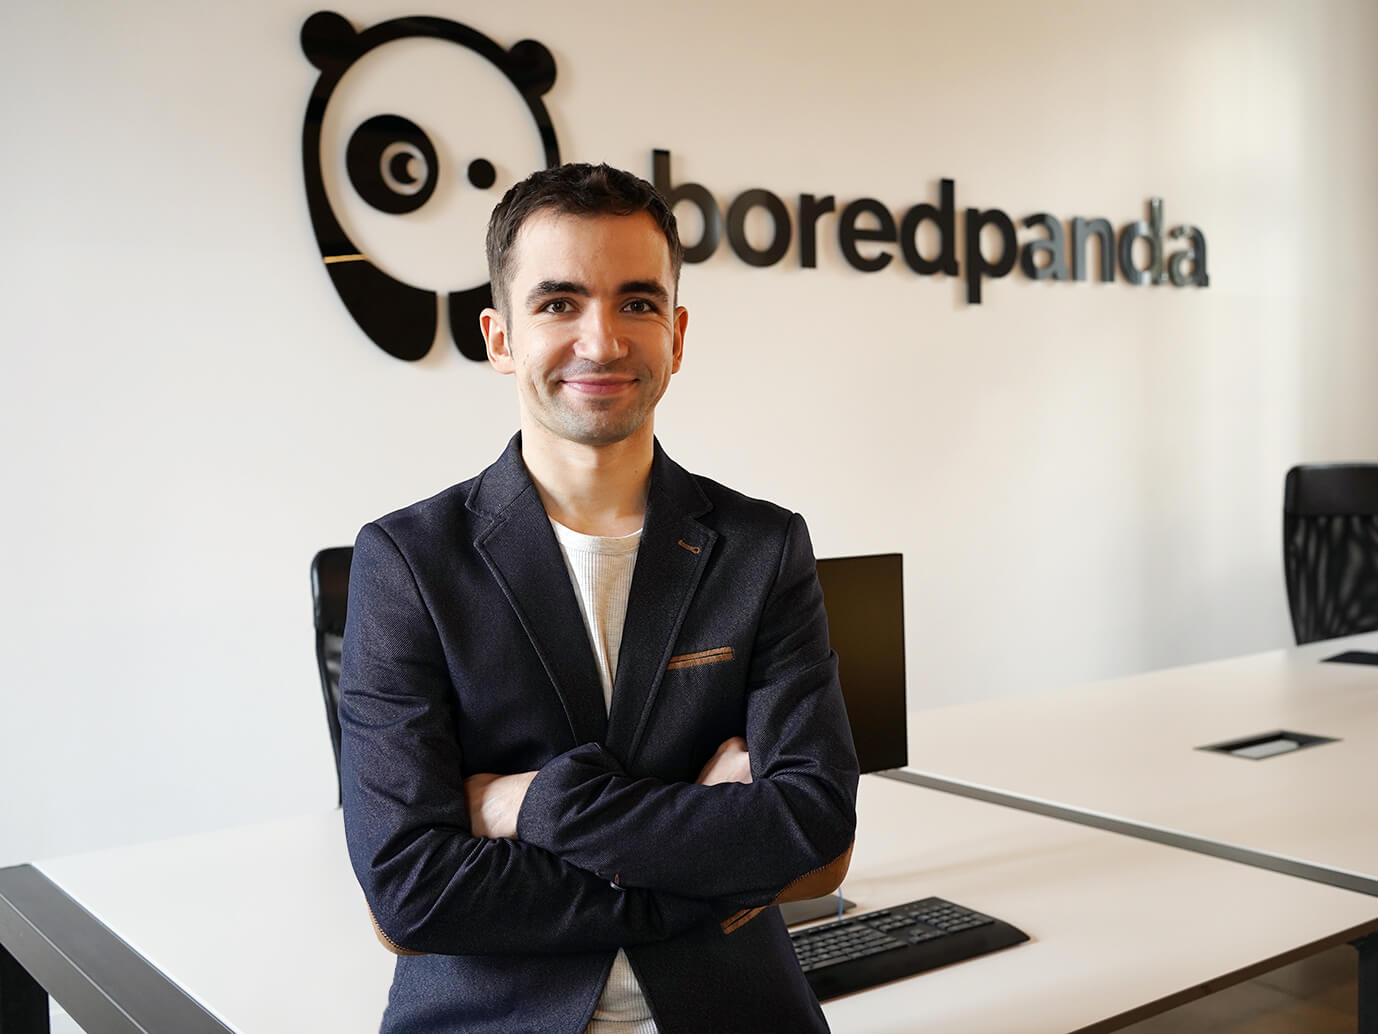 The CEO of Bored Panda, Tomas Banišauskas, pulls back the curtain on how to make millions from online popularity